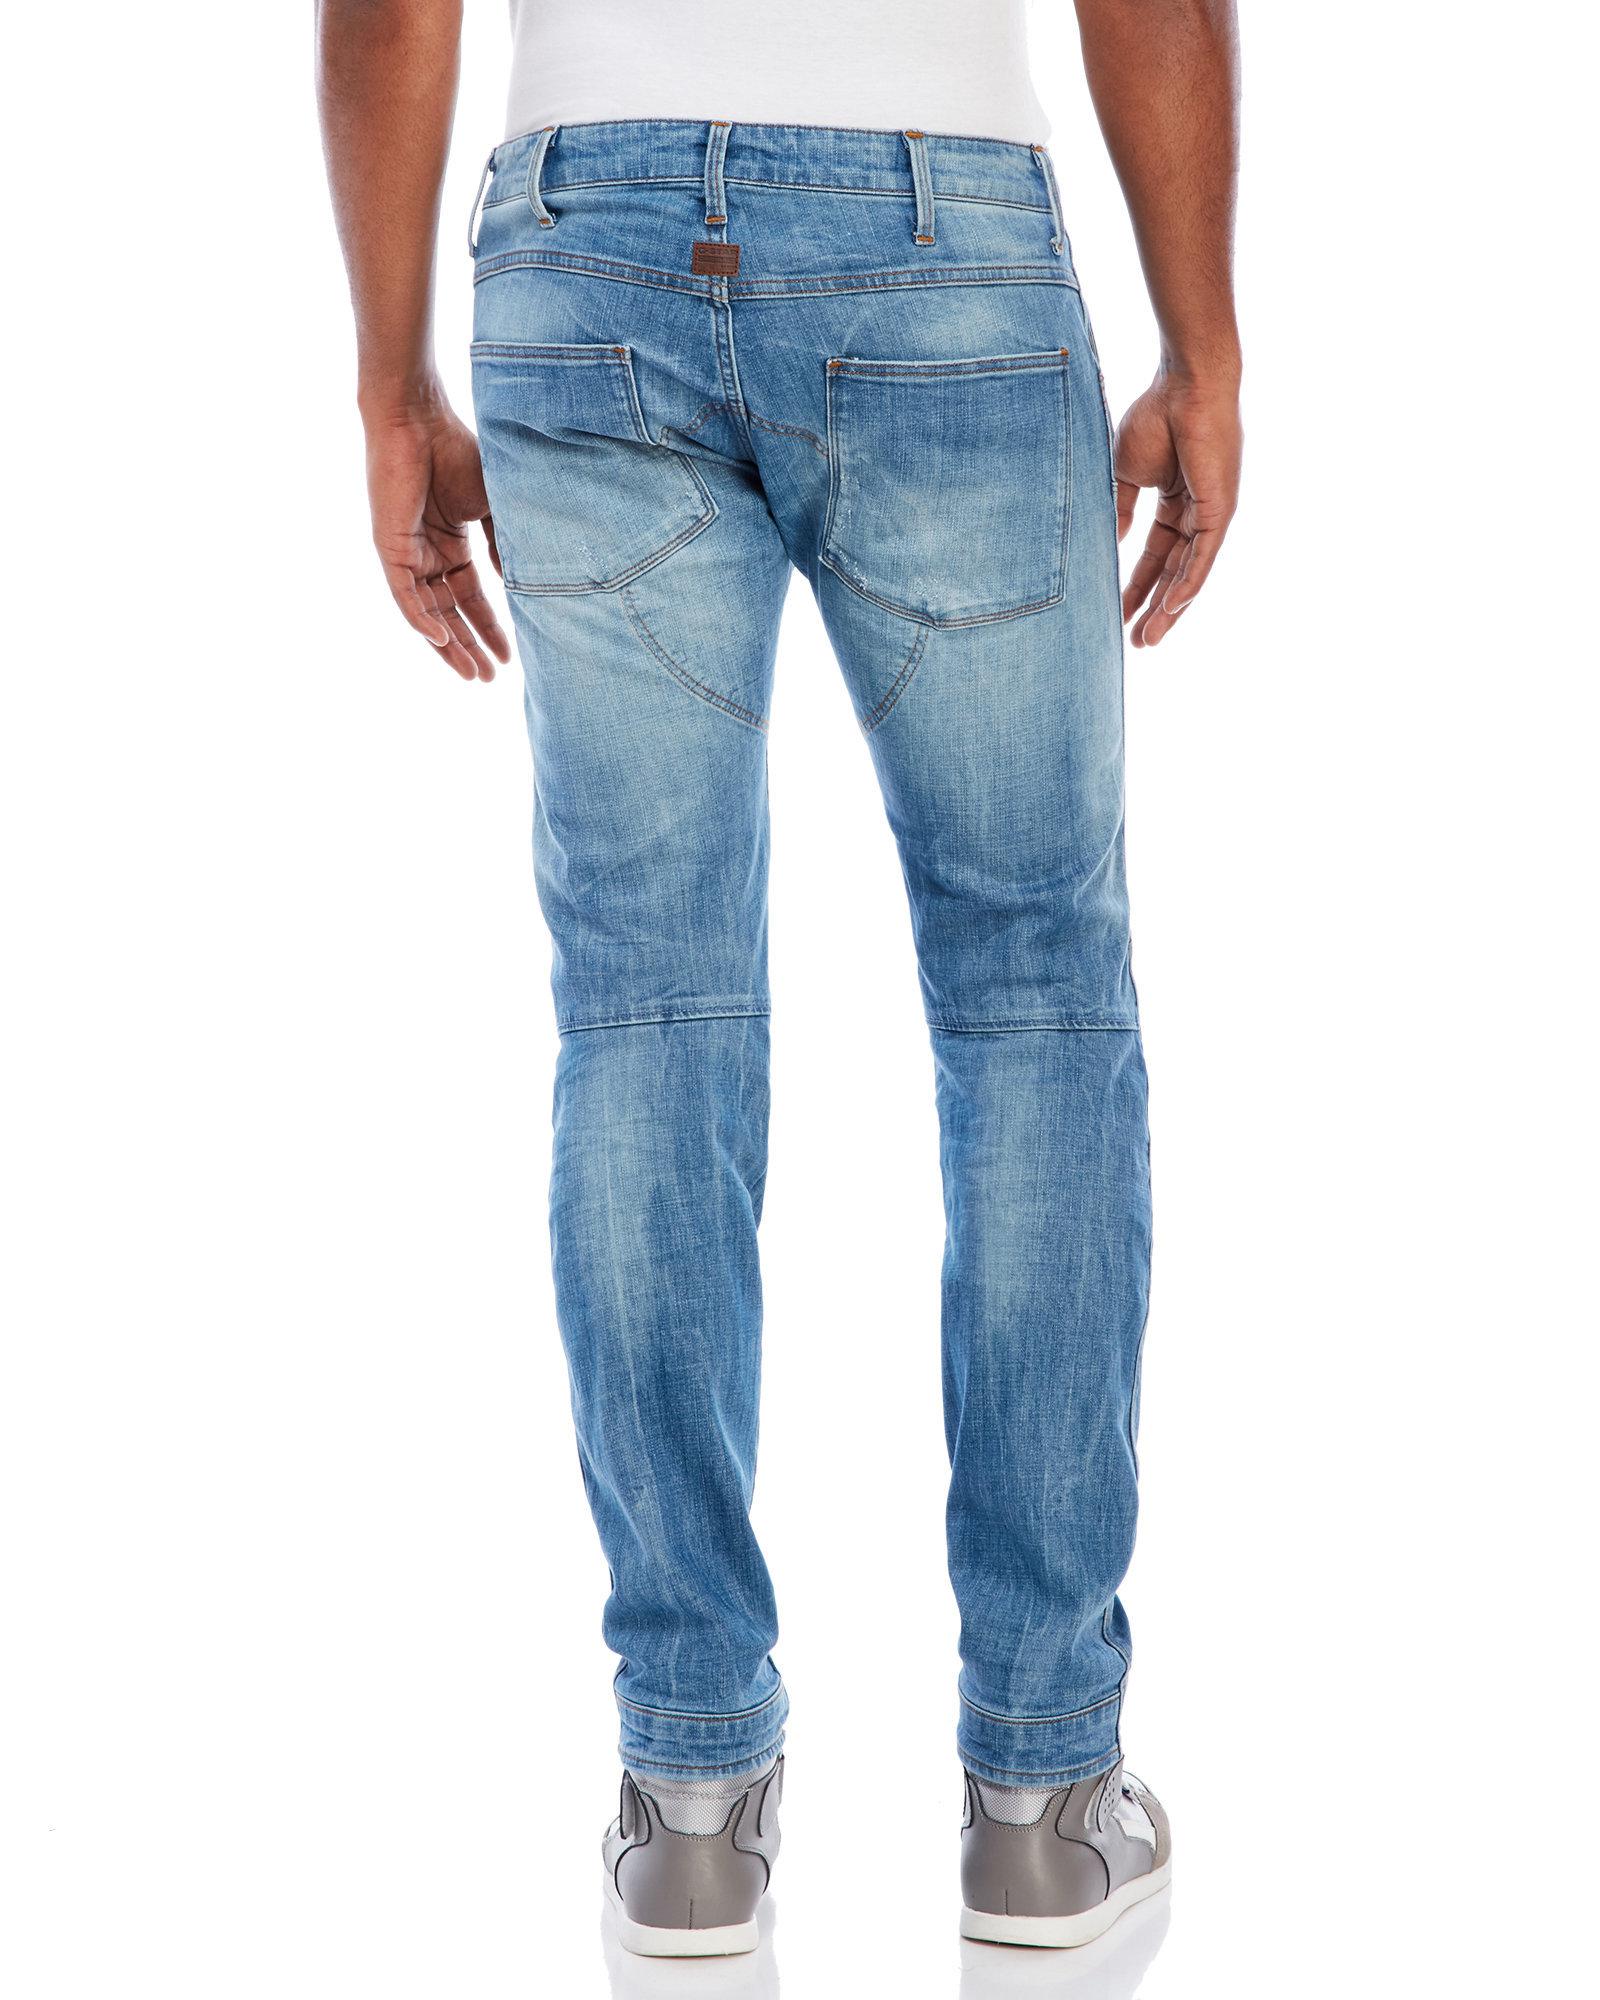 G-Star RAW Denim Deconstructed 3d Tapered Jeans in Blue for Men - Lyst